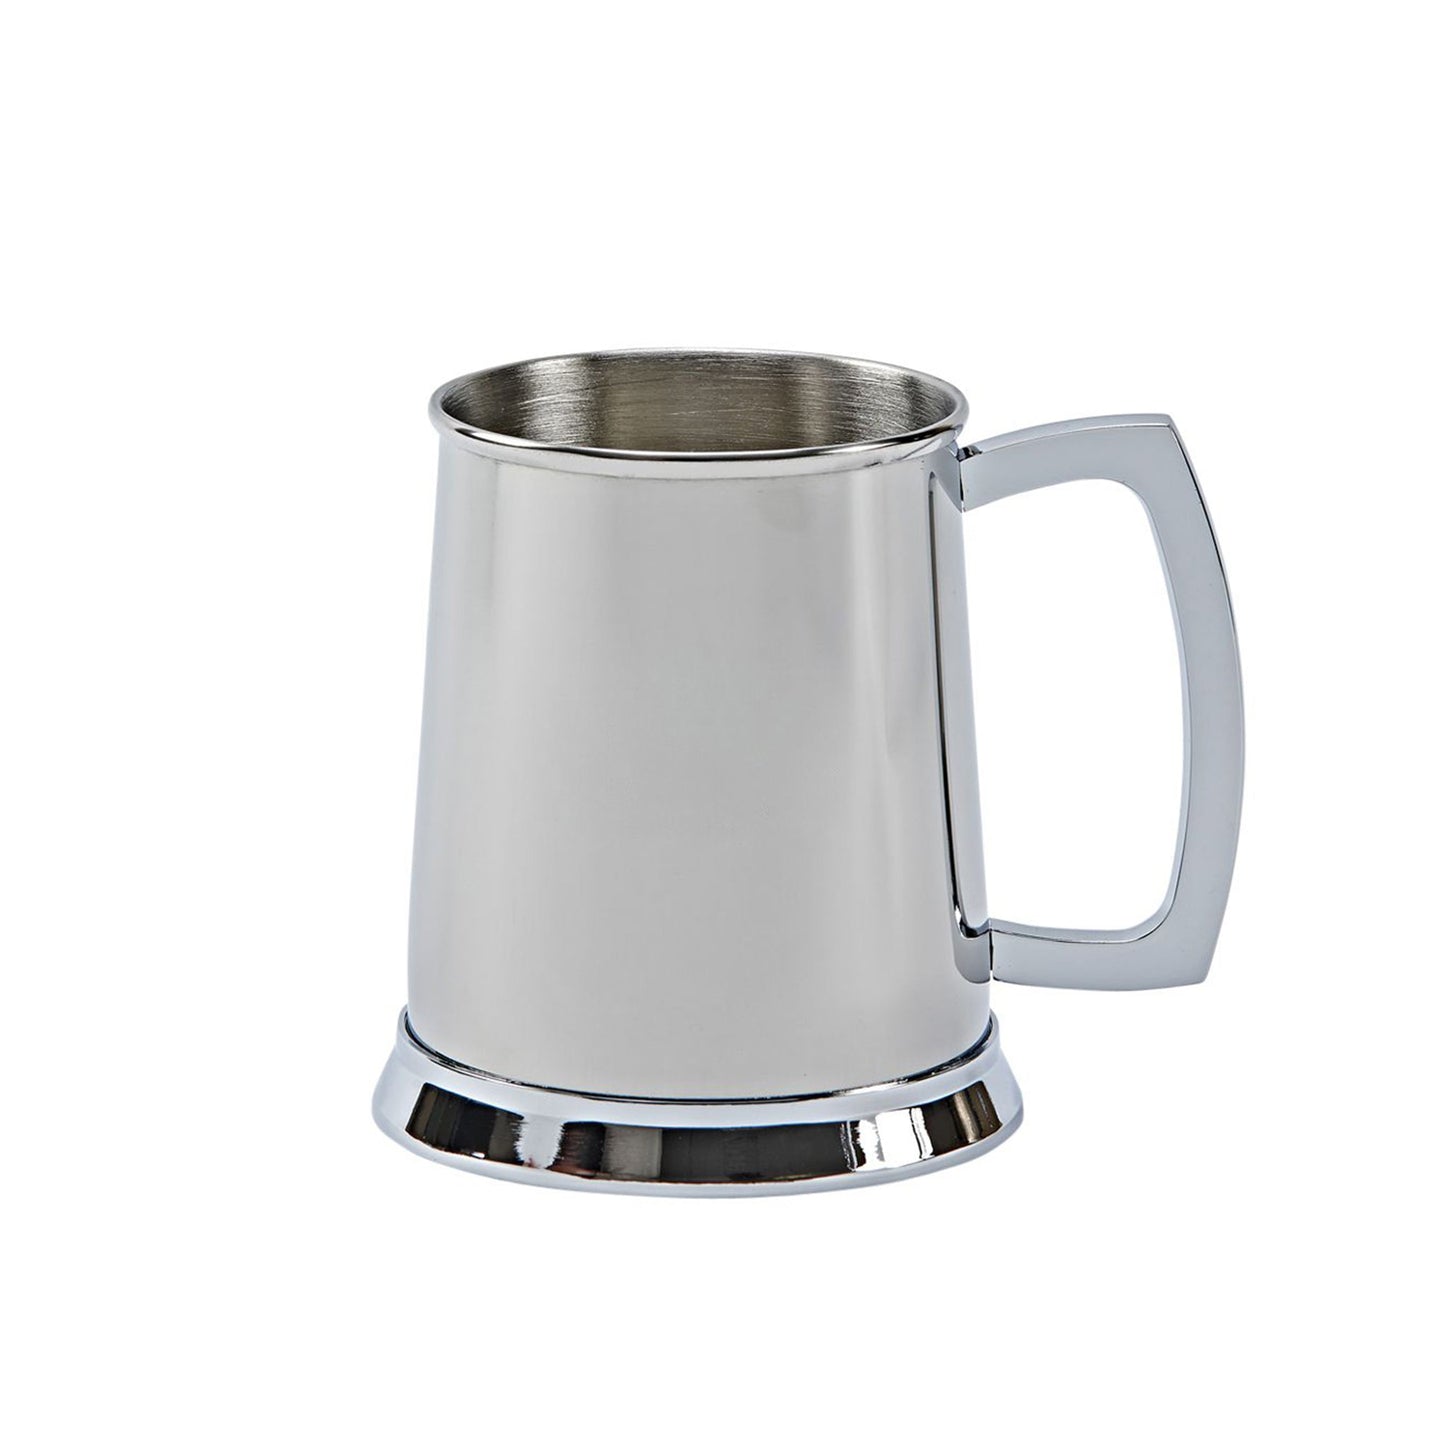 Stainless Steel Tankard with Bright Polished Finish - 20 oz by Creative Gifts